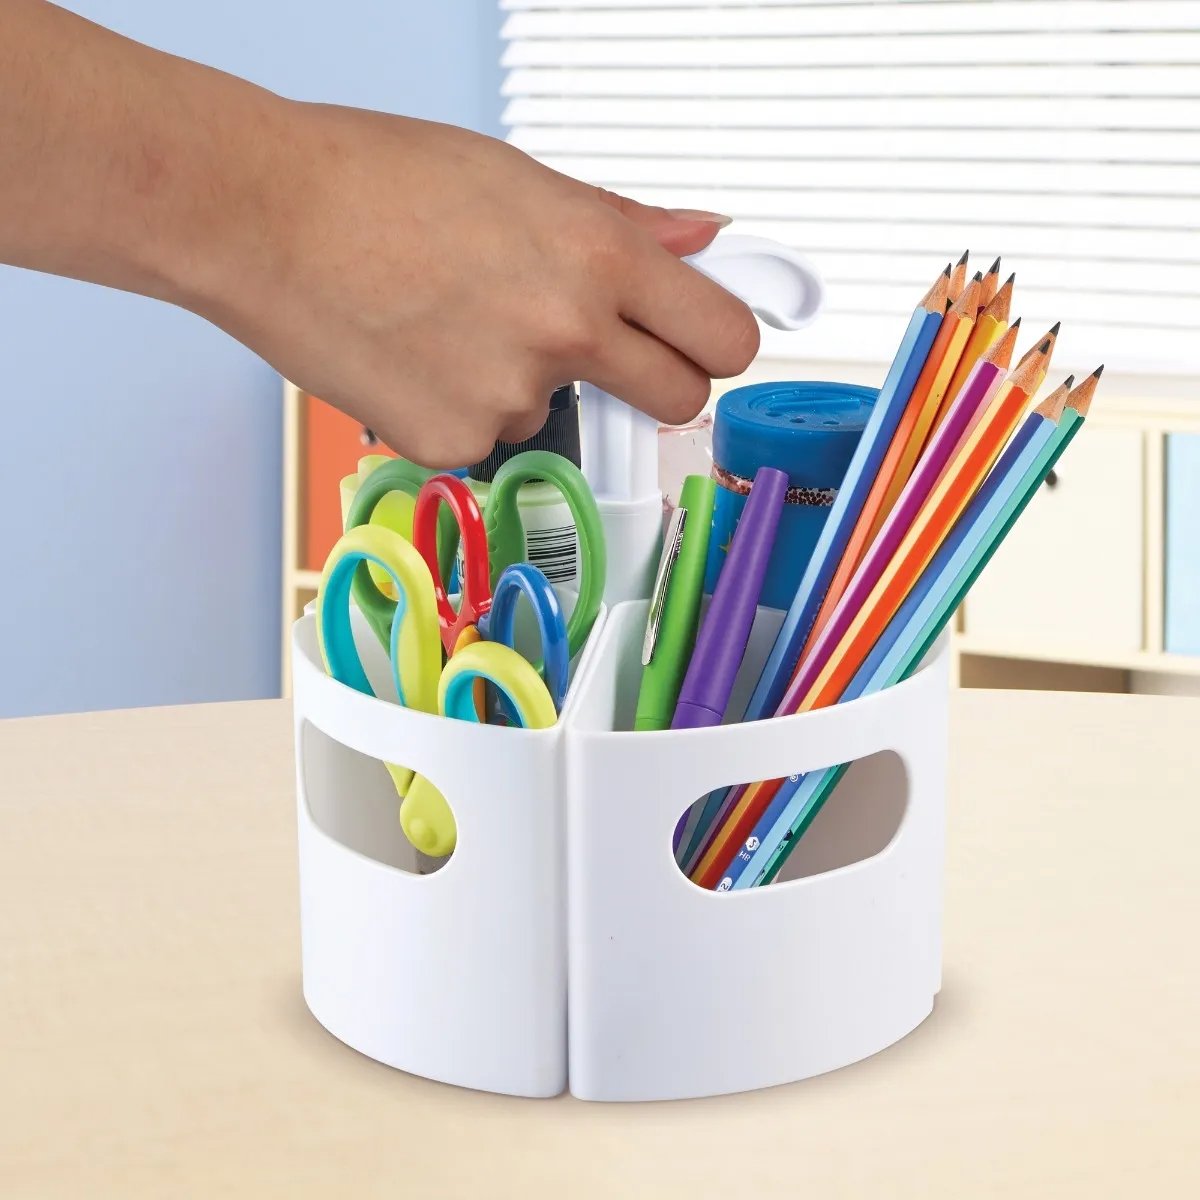 Create-a-Space Mini-Centre - White, Take creativity everywhere it takes you with a mini white version of multicolour Create-A-Space Mini-Centre. Tidy, sort and store maker materials and move them wherever you need them. This easy-carry Create-a-Space Mini-Centre organiser is ideal for classroom and home use. Three removable stationery storage compartments fit onto the easy-grip handle. The Create-A-Space Mini-Centre now in white! Our range of storage caddies brings an easy, convenient way to organise and pr